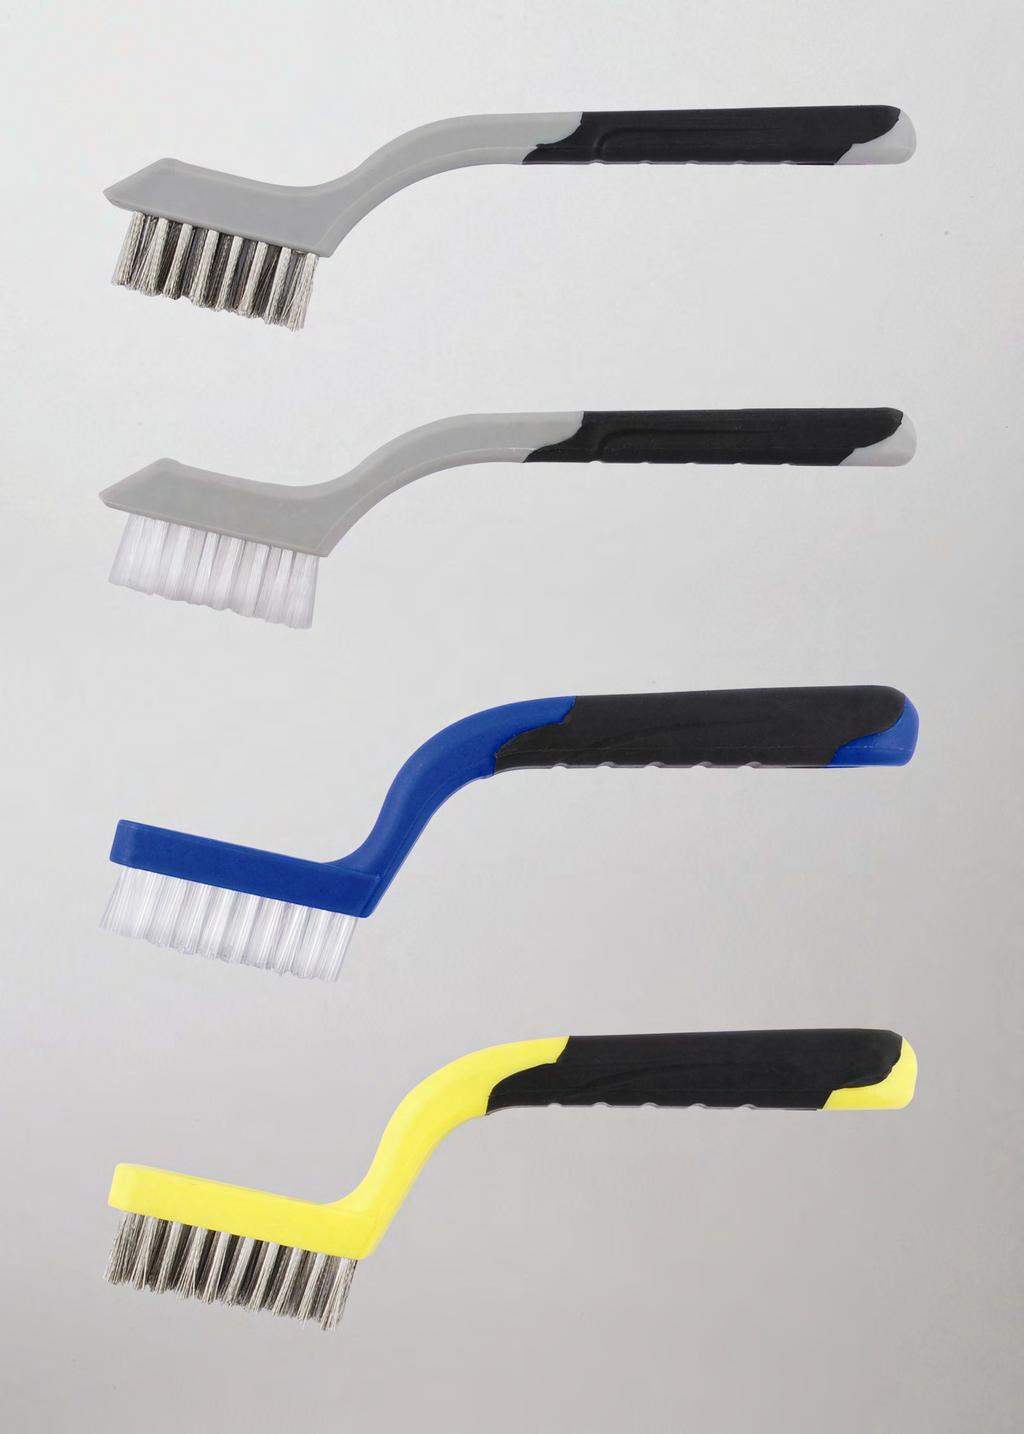 Large Angled Instrument Cleaning Brushes 45-304SS SOFT GRIP ANGLED BRUSH 18CM LENGTH. STAINLESS STEEL BRISTLES 40MM X 7MM 45-304N SOFT GRIP ANGLED BRUSH 18CM LENGTH.